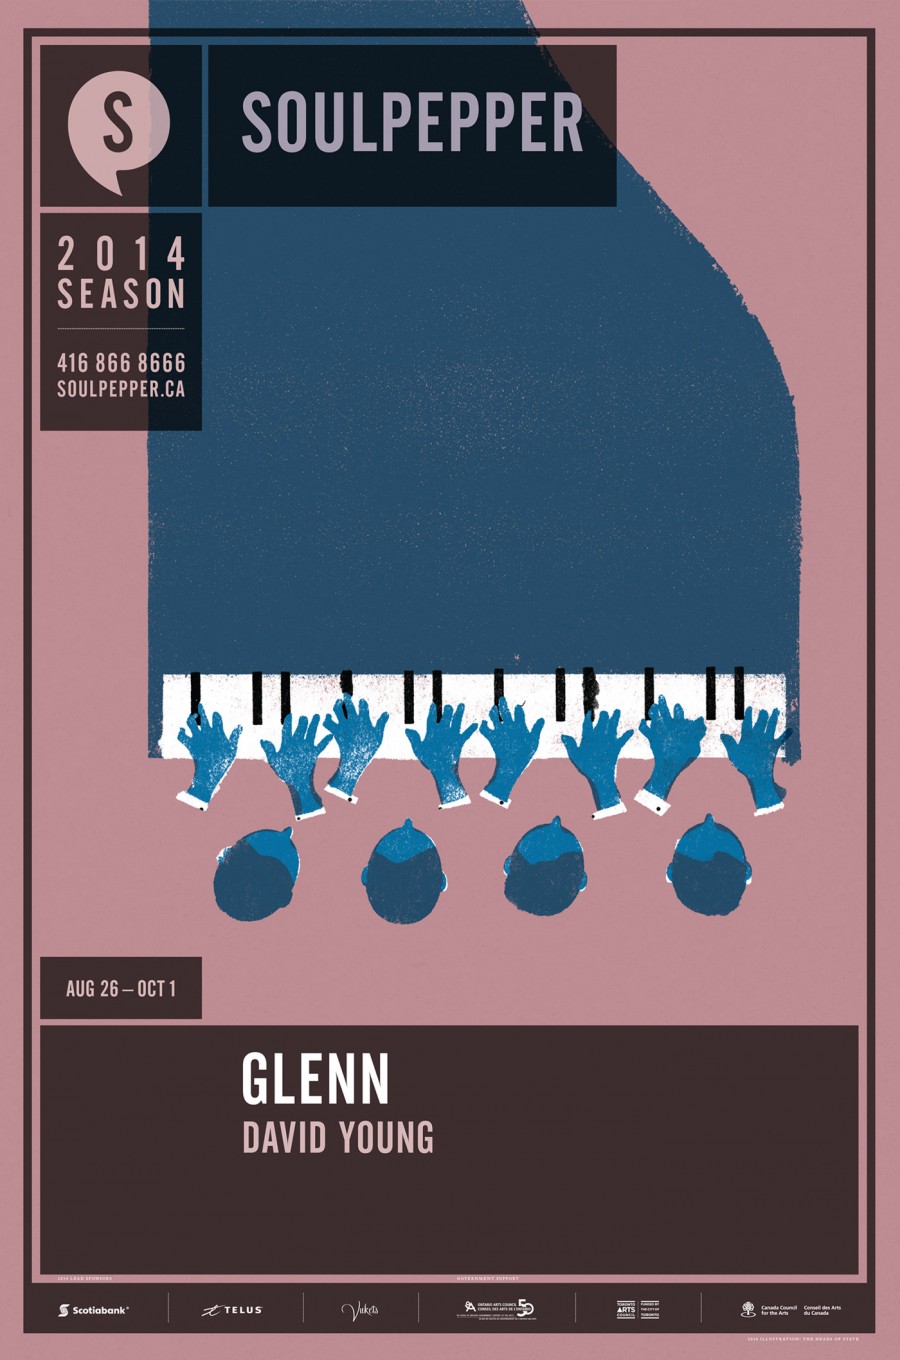 Glenn - Soulpepper Theatre - 2014 Season Poster Series - The Heads of State